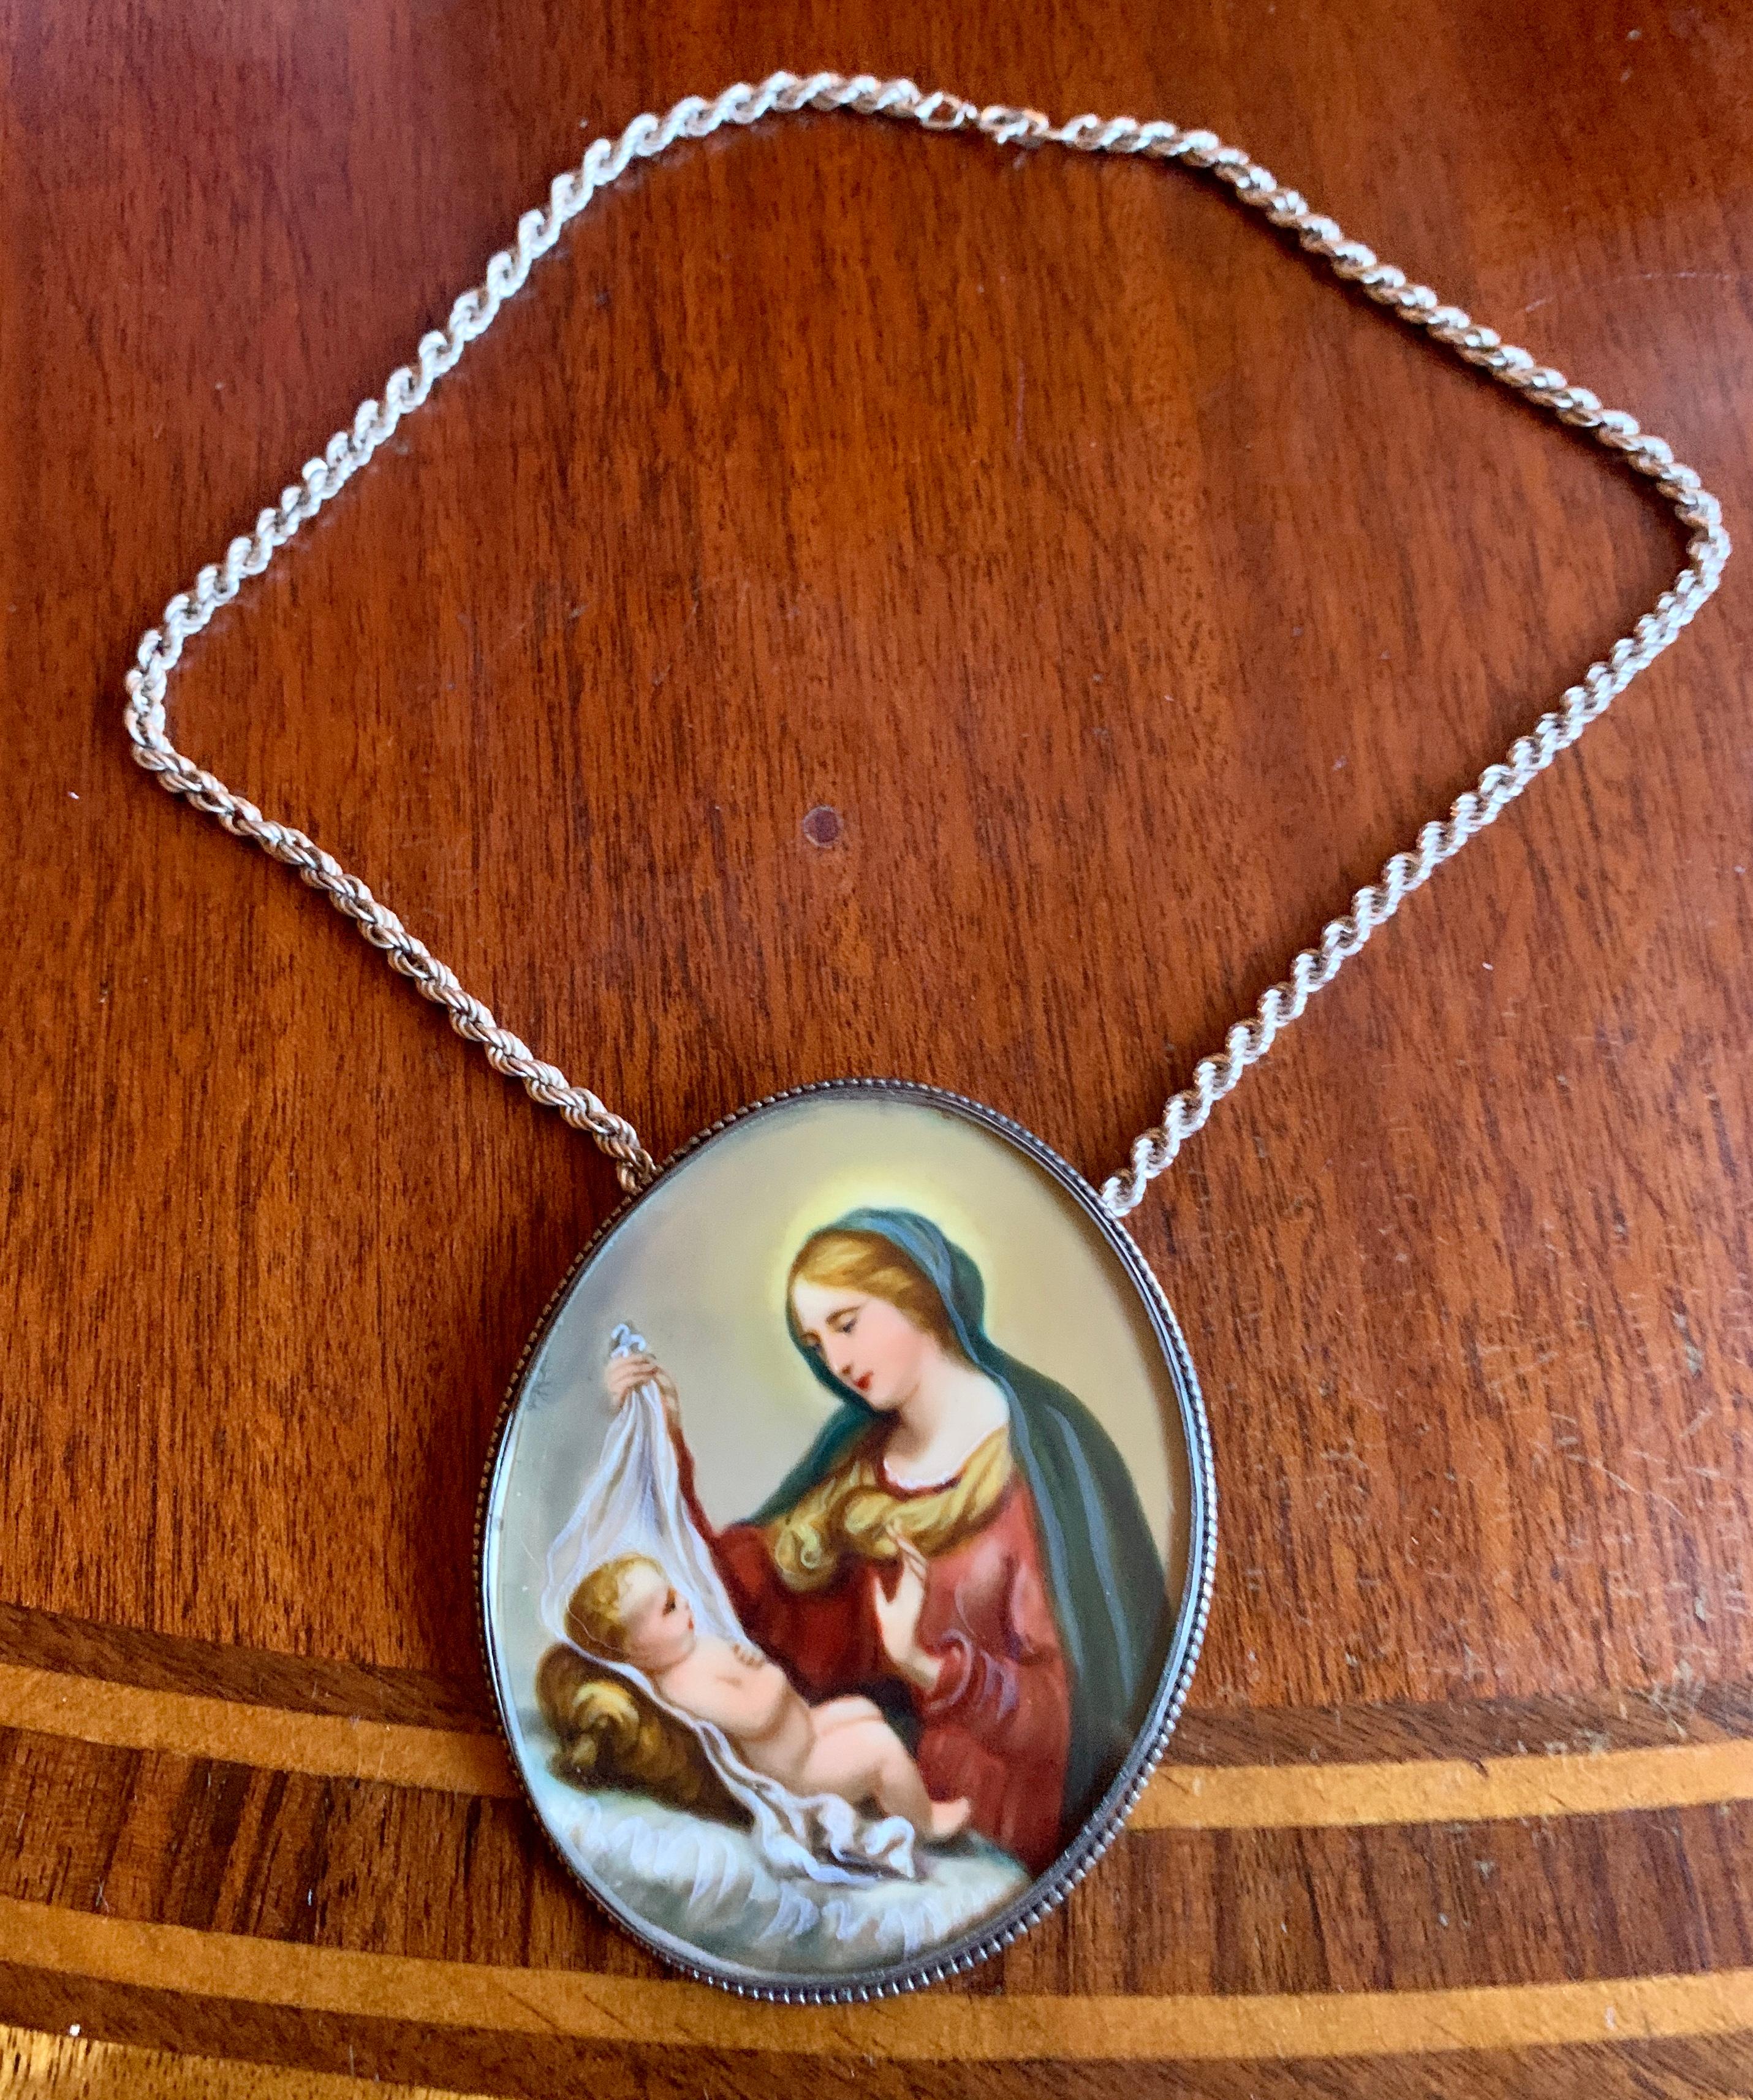 This is a wonderful Antique Pendant Necklace with an extraordinary hand painted portrait miniature of the Madonna and Child in a Sterling Silver Frame and Sterling Silver chain.  The portrait miniature is of the highest quality.  The faces of the